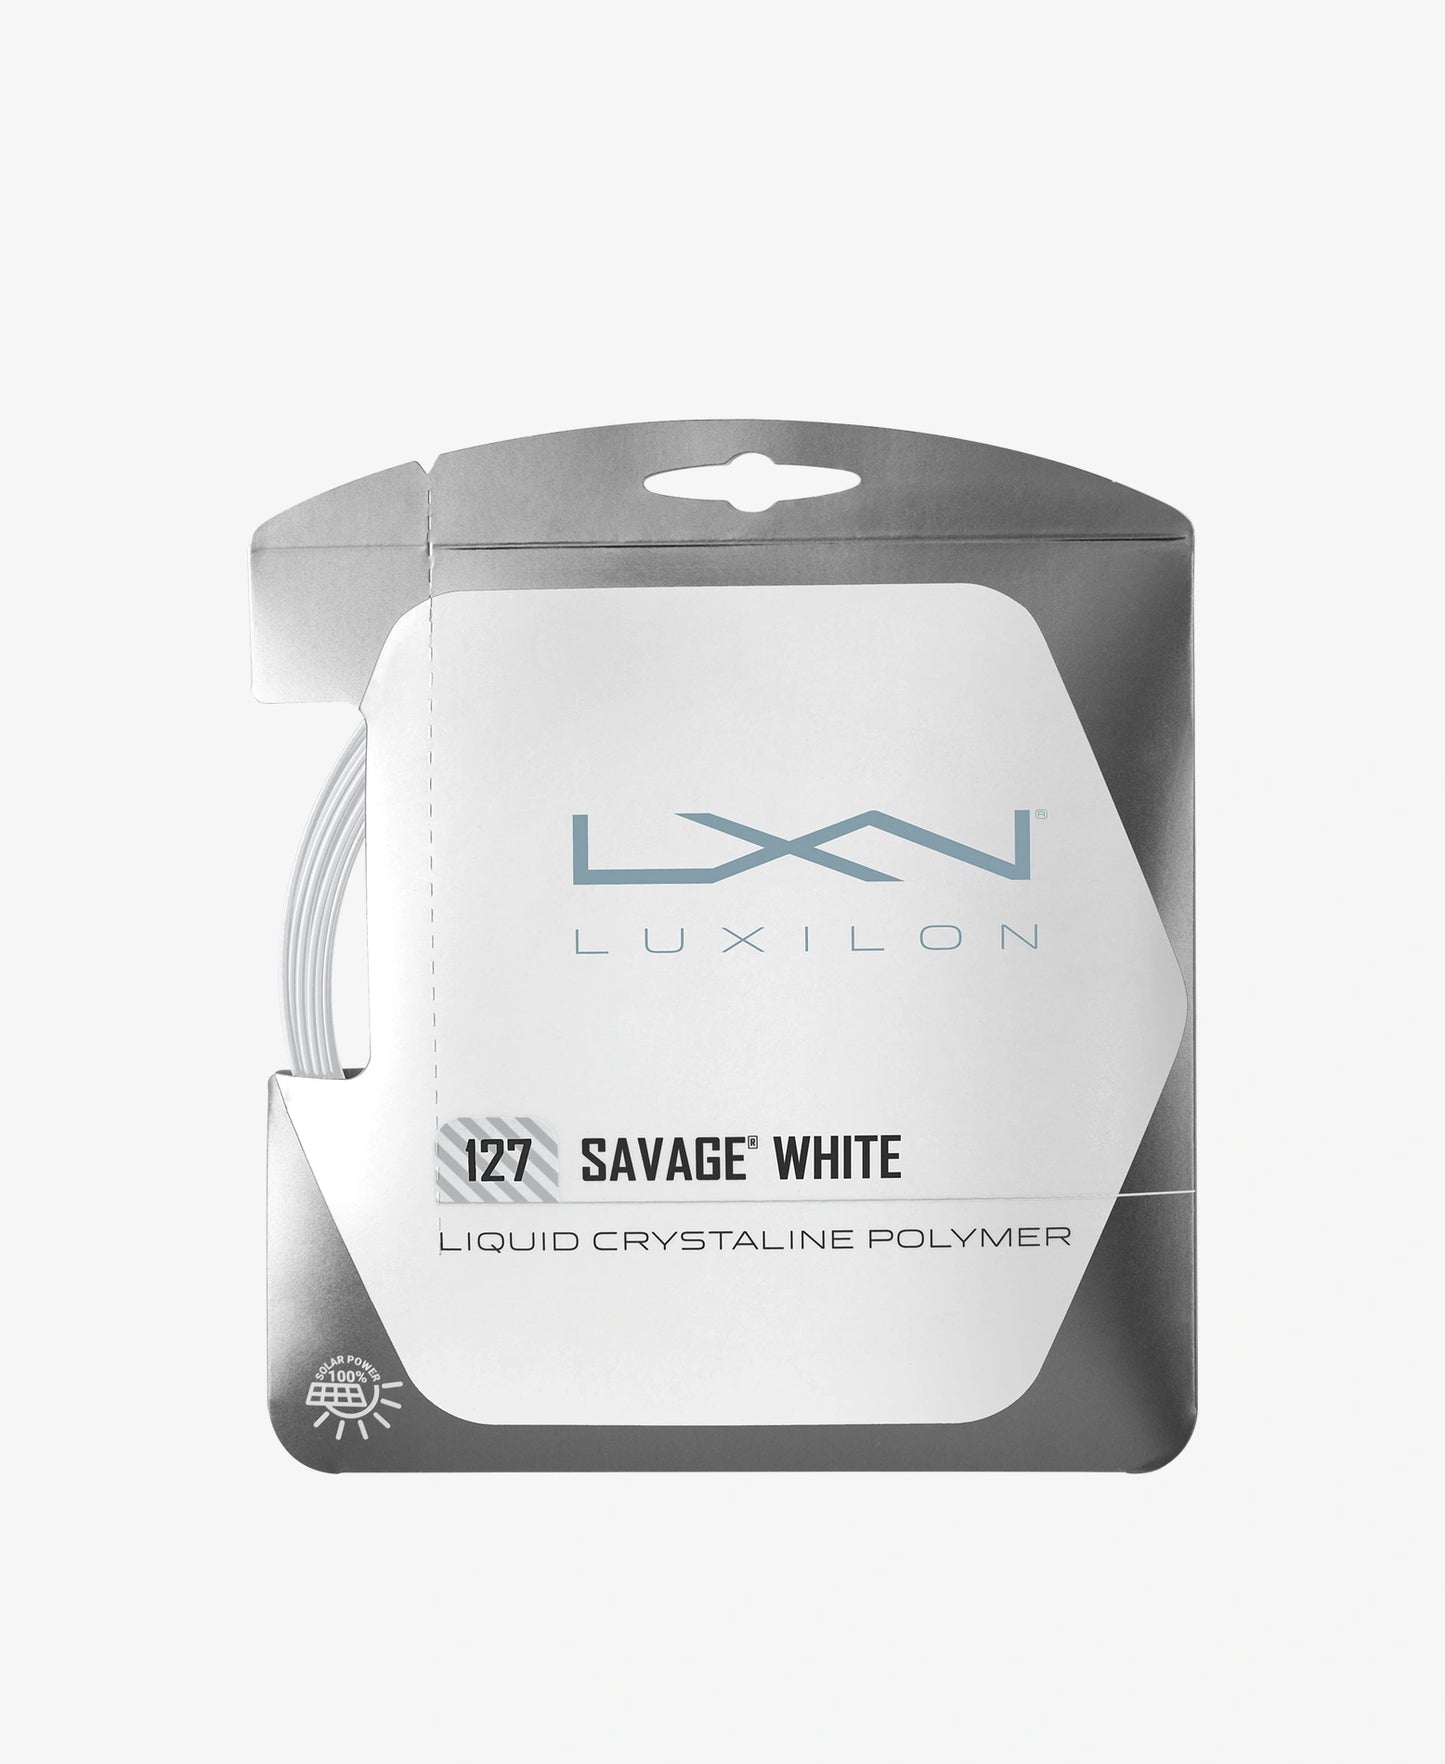 A set of Luxilon Savage 127 Tennis String in White colour available for sale at GSM Sports.